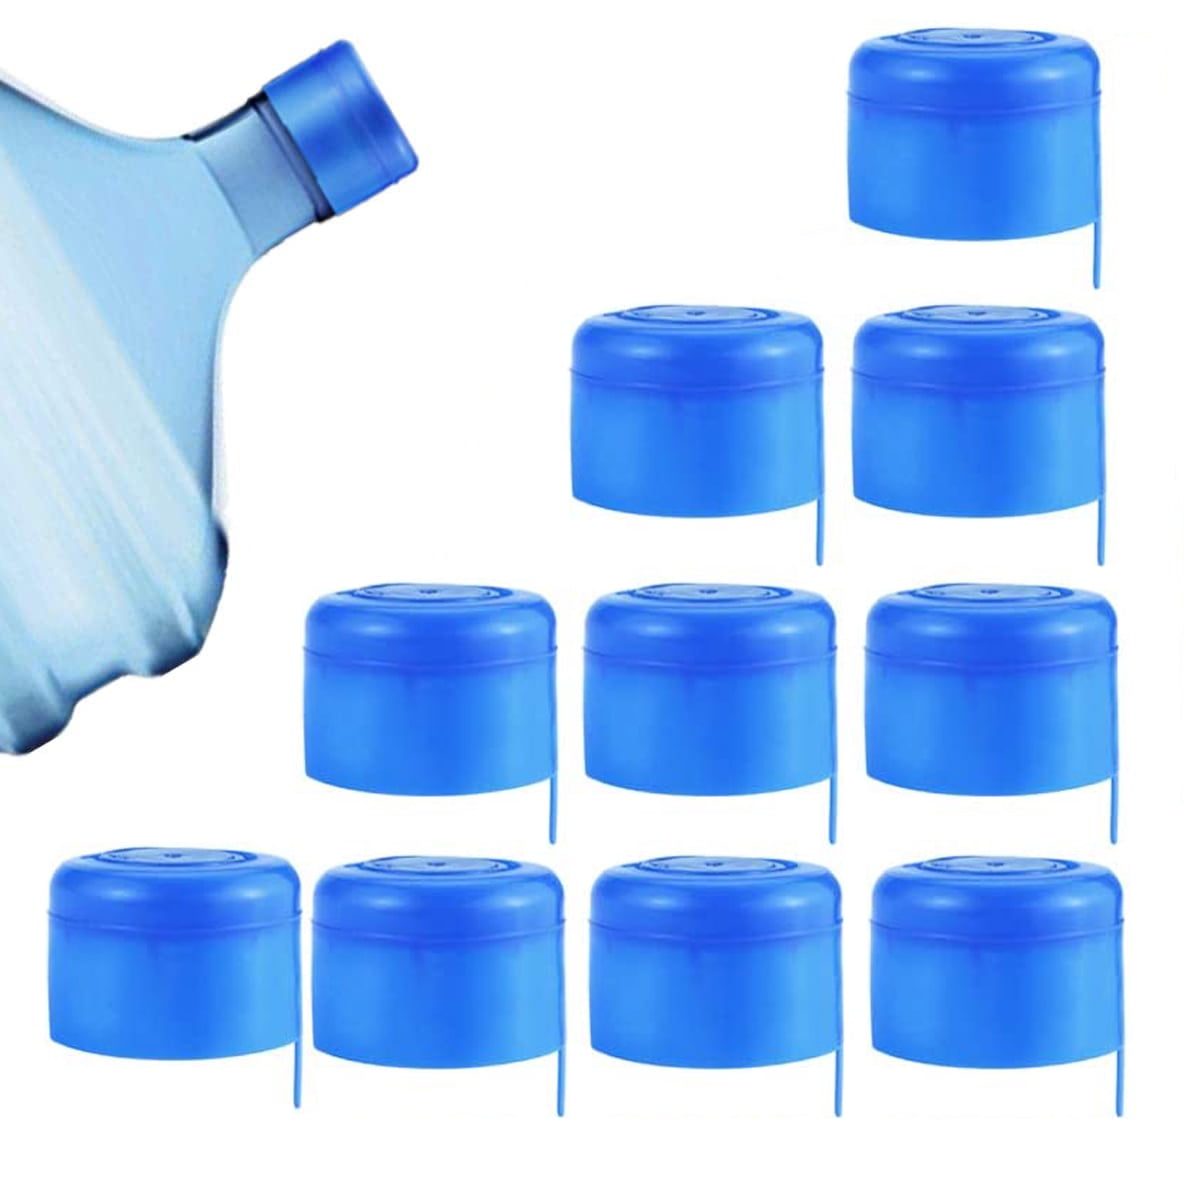 48MM Bottles 3 55MM Secure Your Bottle Leak Proof Lot of 5 Caps 28MM 100MM Screw On Cap Lids Tops for 1 5 & 6 Gallon Water 2 53MM 120MM Snap On Refrigerator 38MM PET 110MM